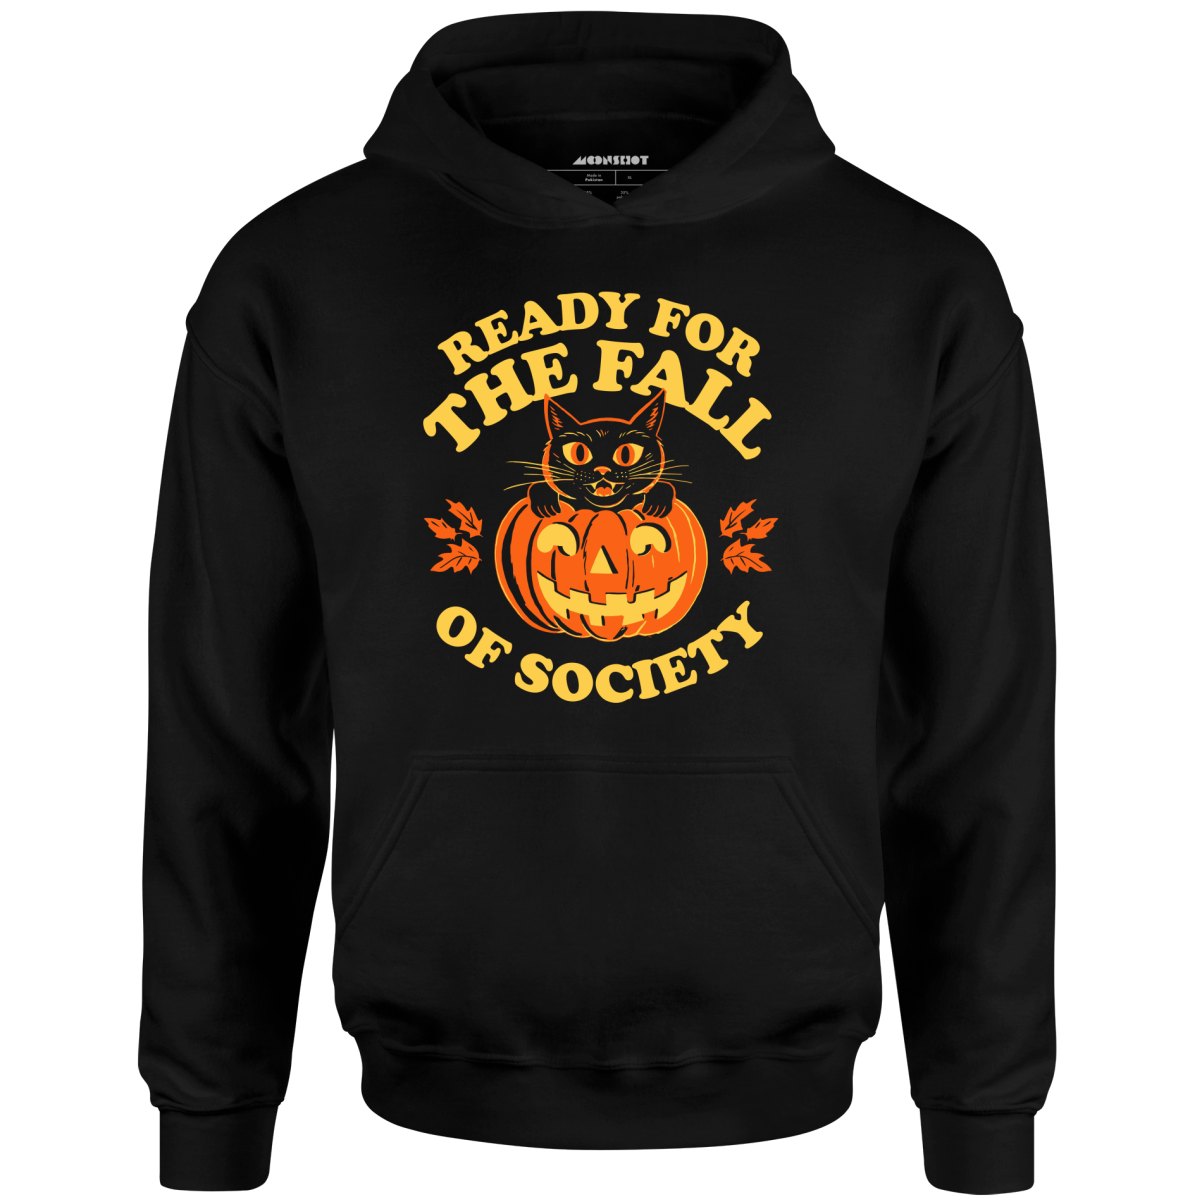 Ready For The Fall of Society - Unisex Hoodie